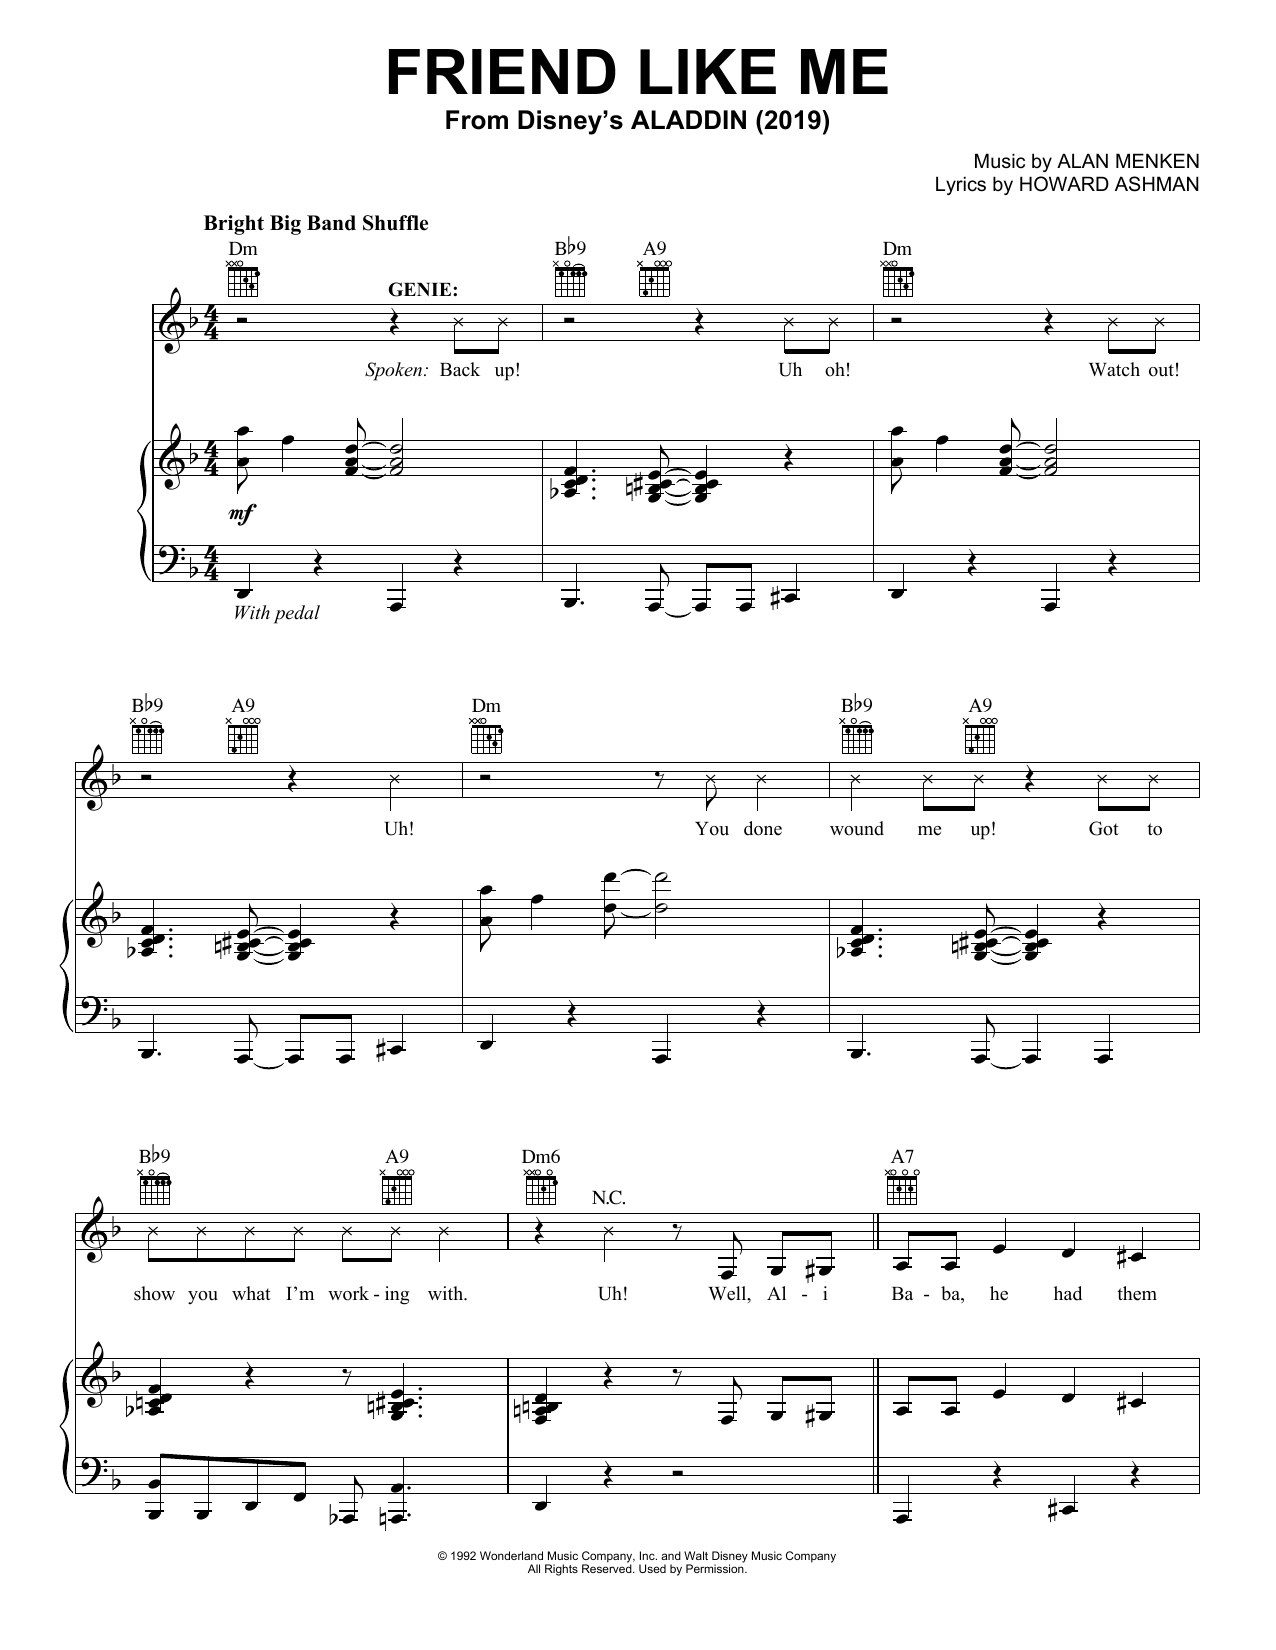 Download Will Smith Friend Like Me (from Disney's Aladdin) Sheet Music